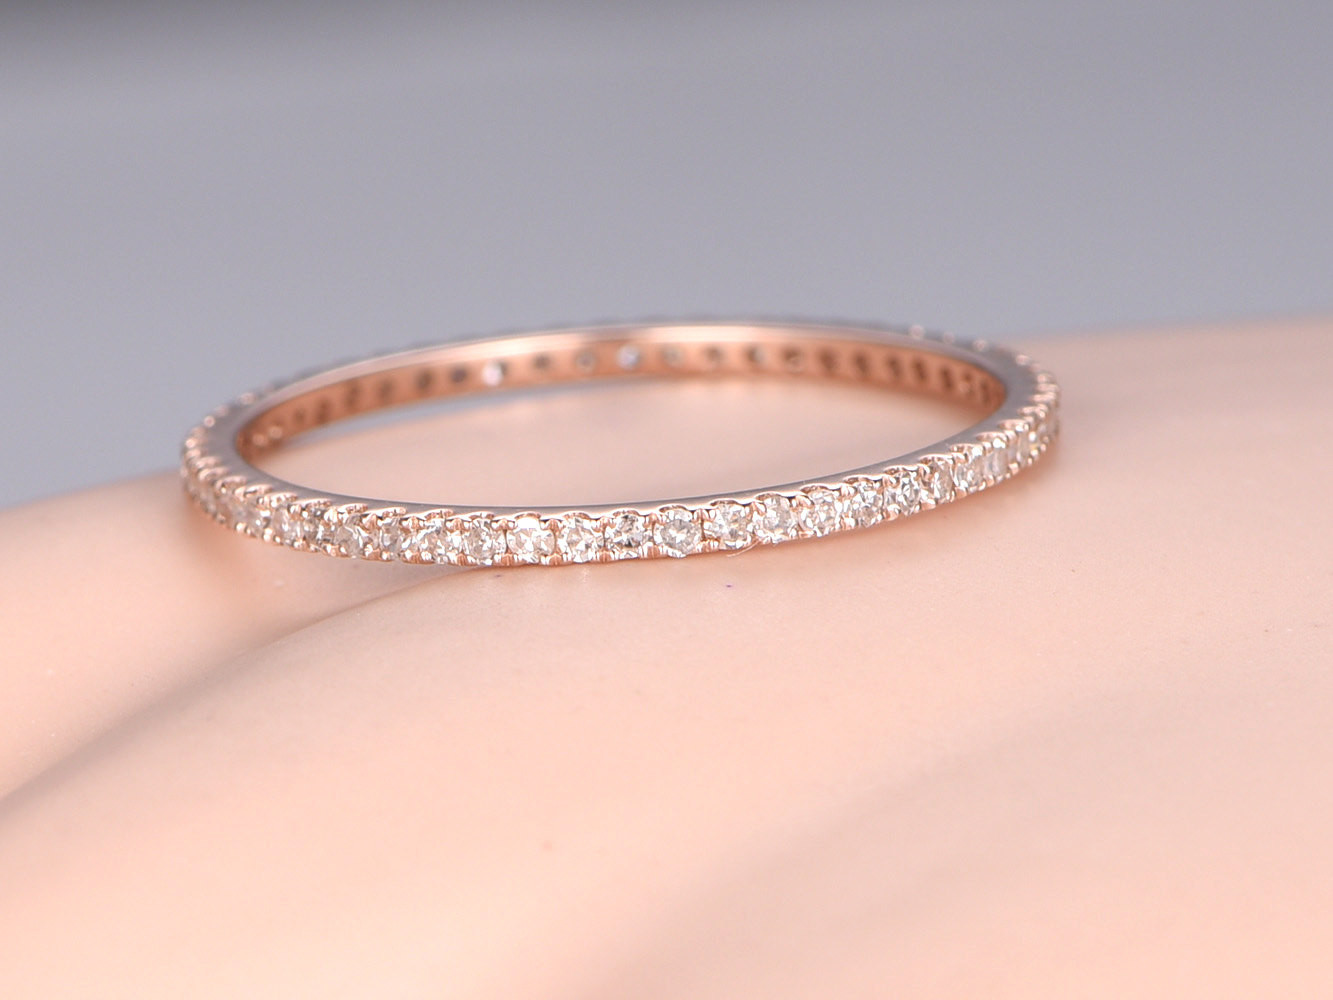 Pave Wedding Bands
 Petite French micro pave Diamond wedding band solid by